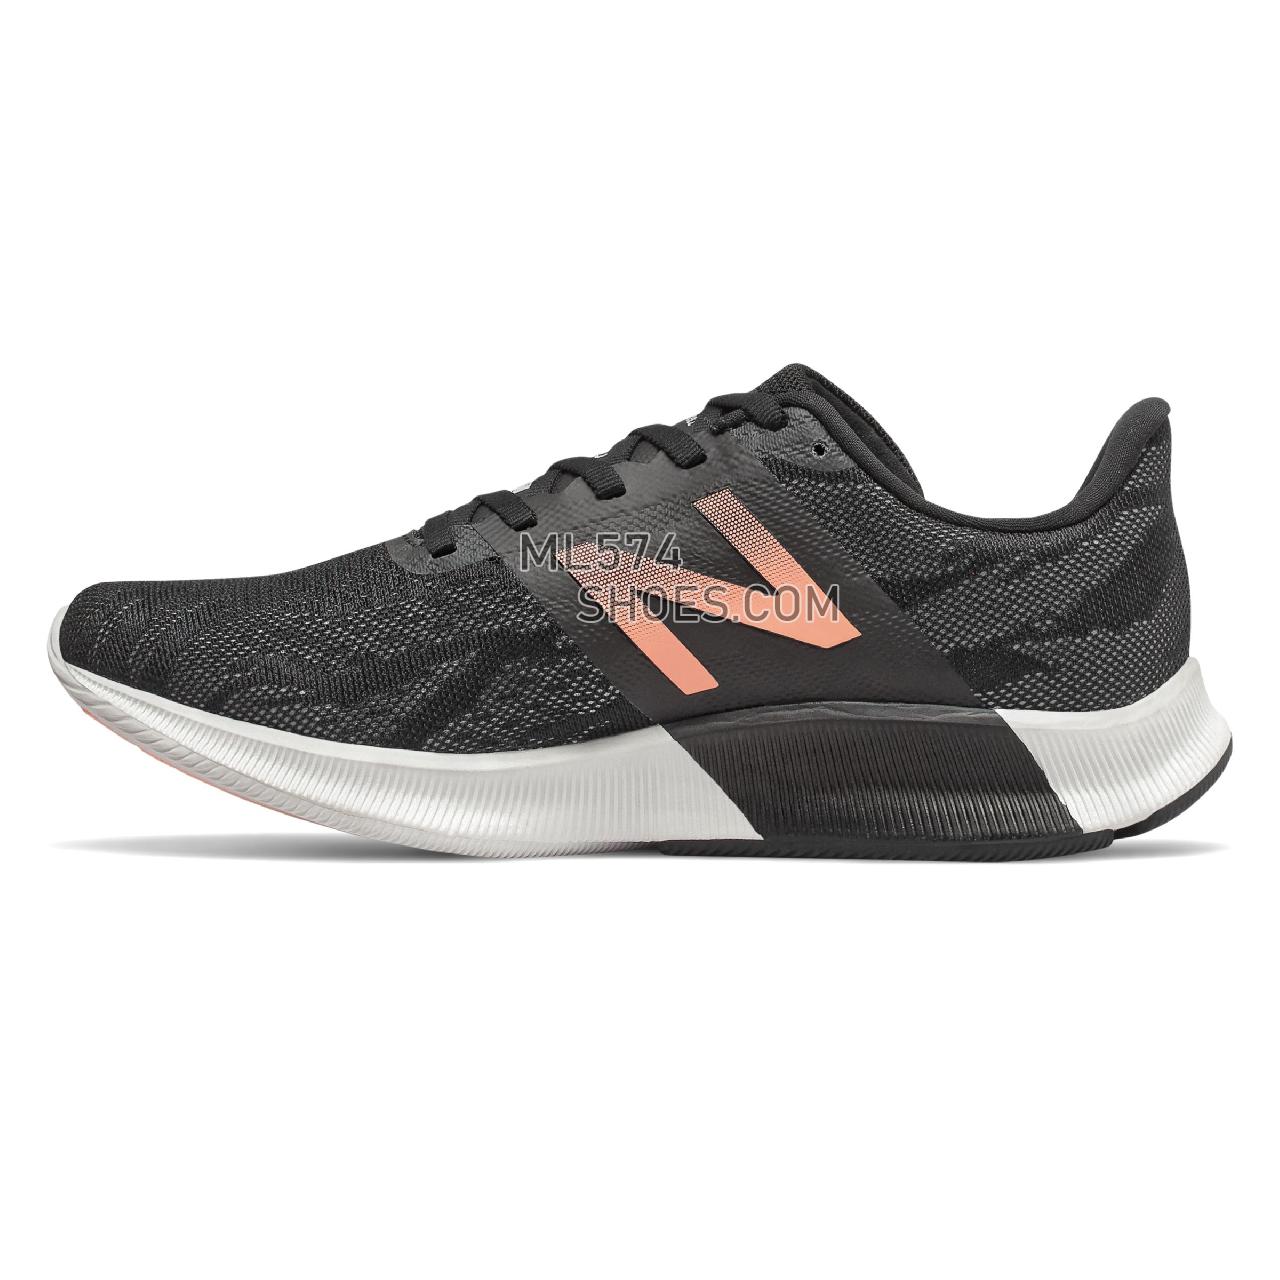 New Balance FuelCell 890v8 - Women's 800 Series - Thunder with Ginger Pink - W890GM8